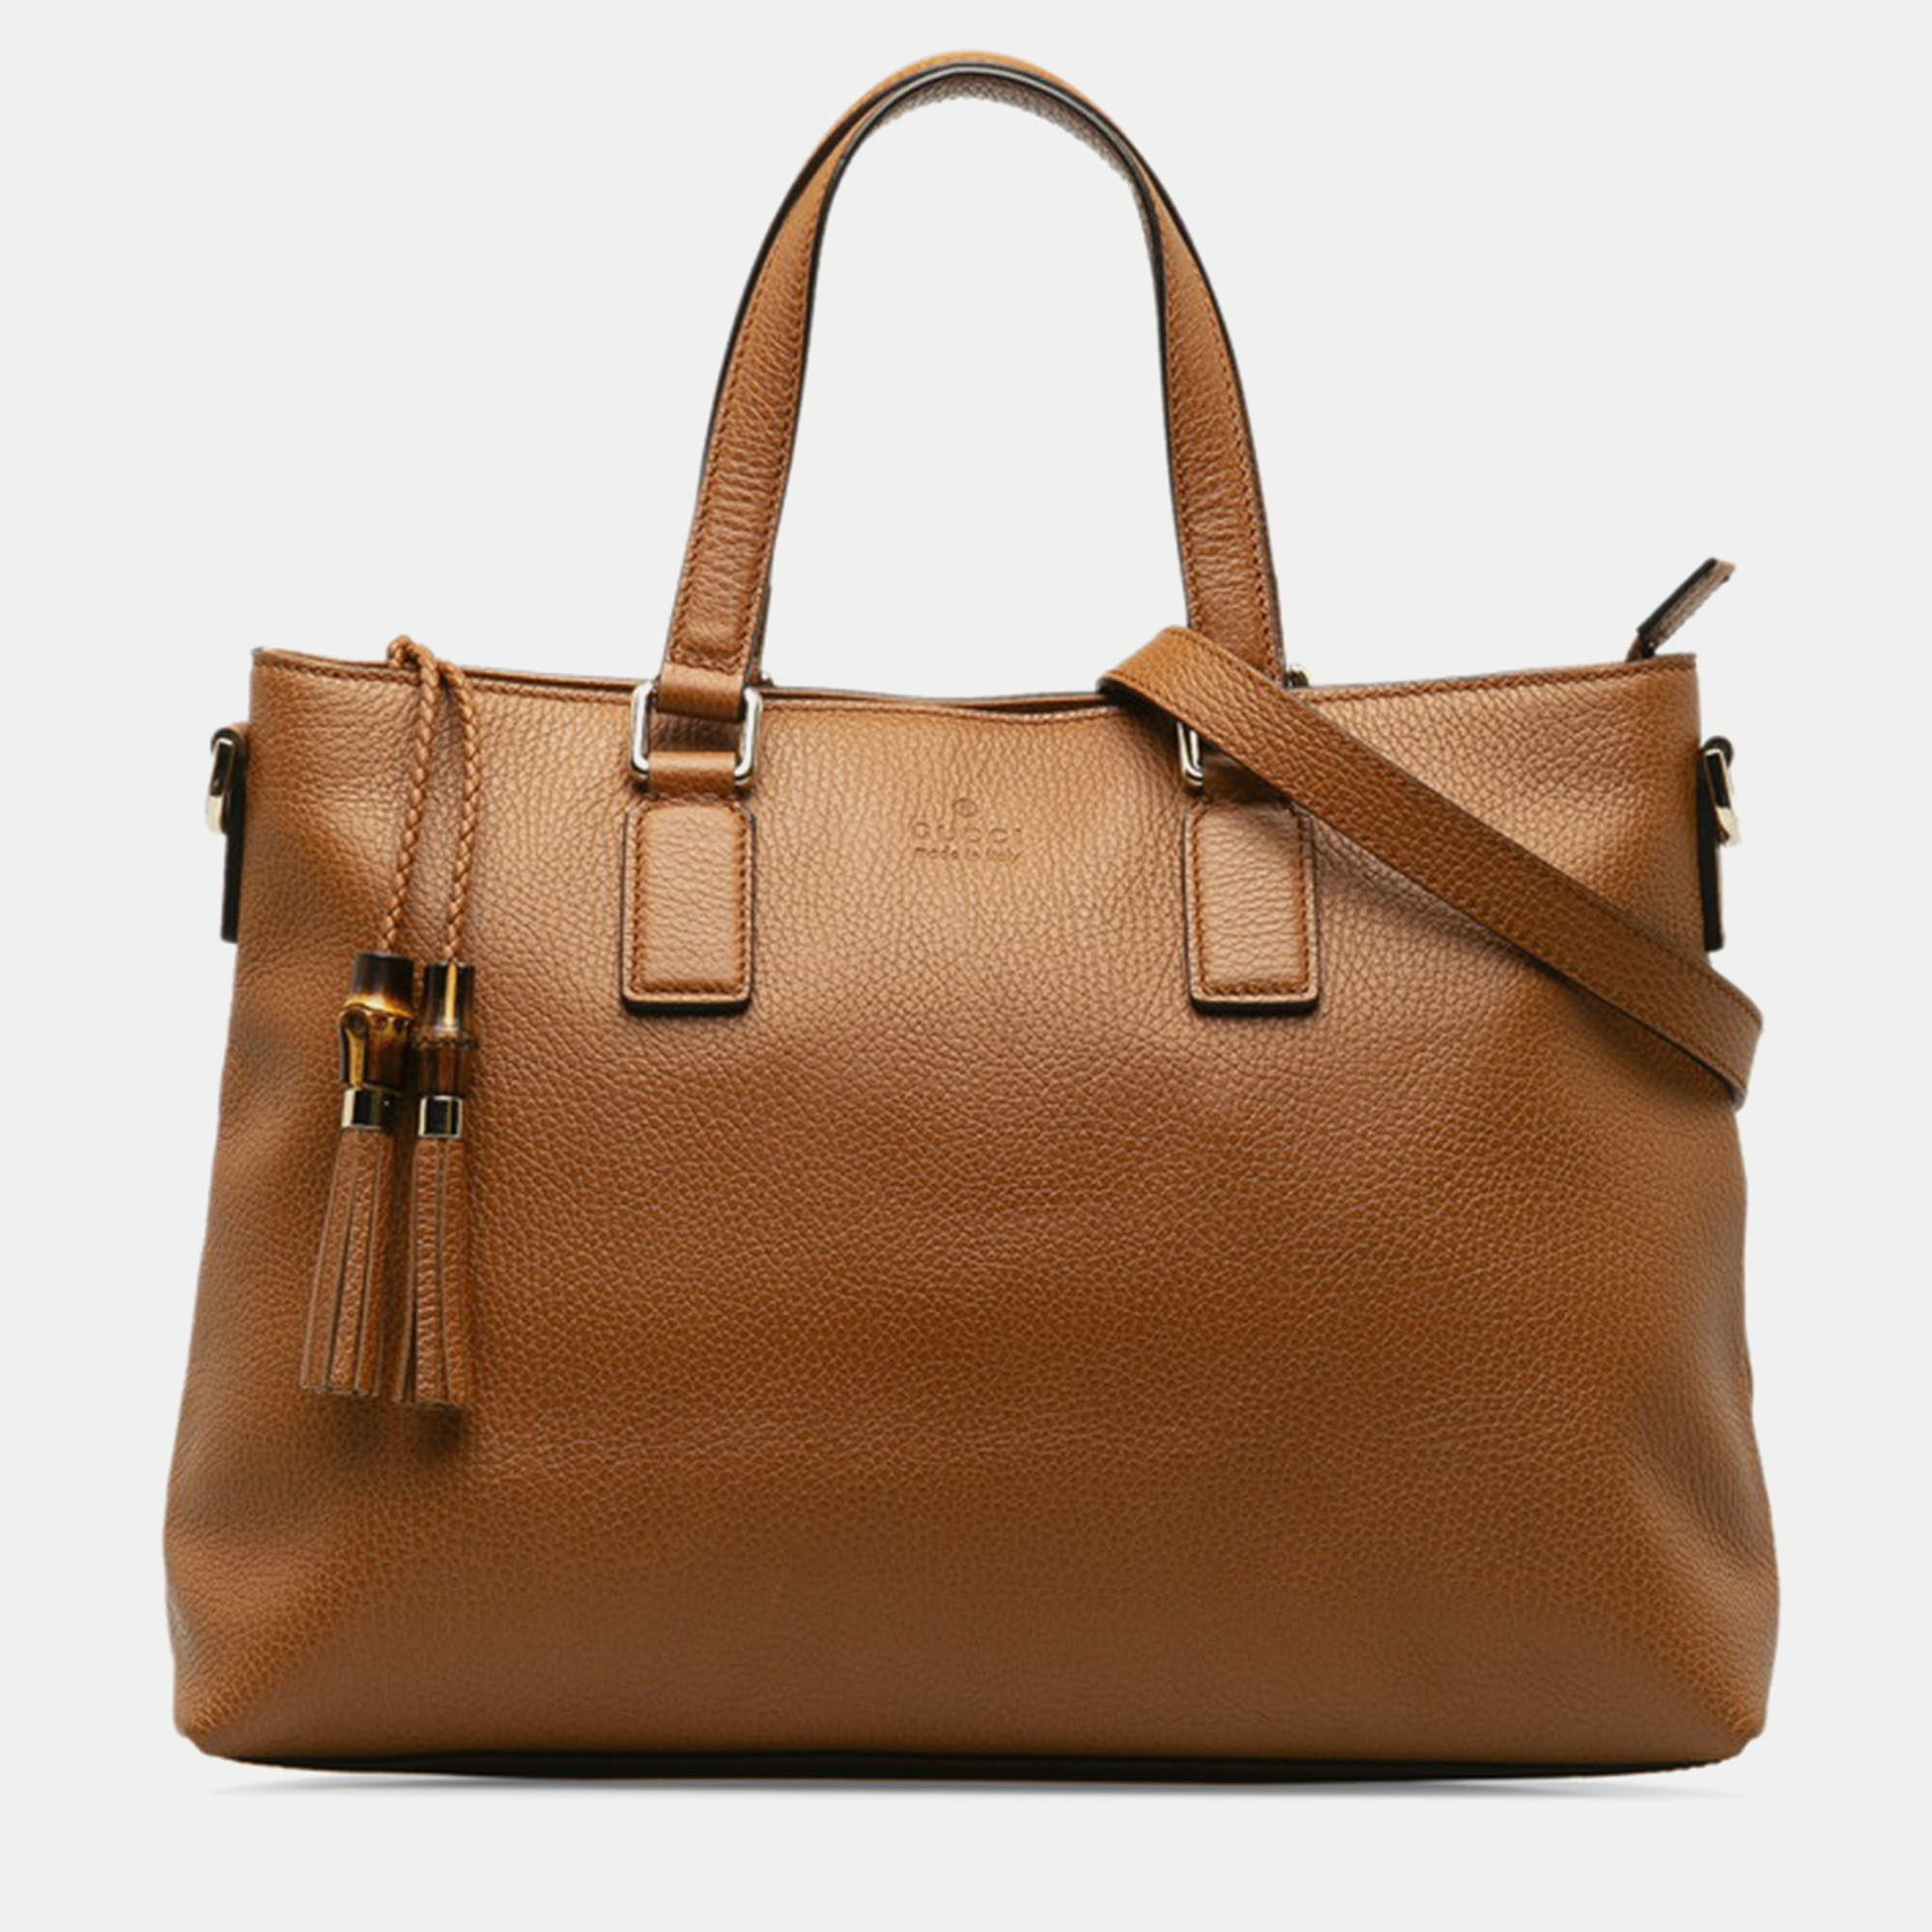 Gucci brown leather bamboo tassel tote bag